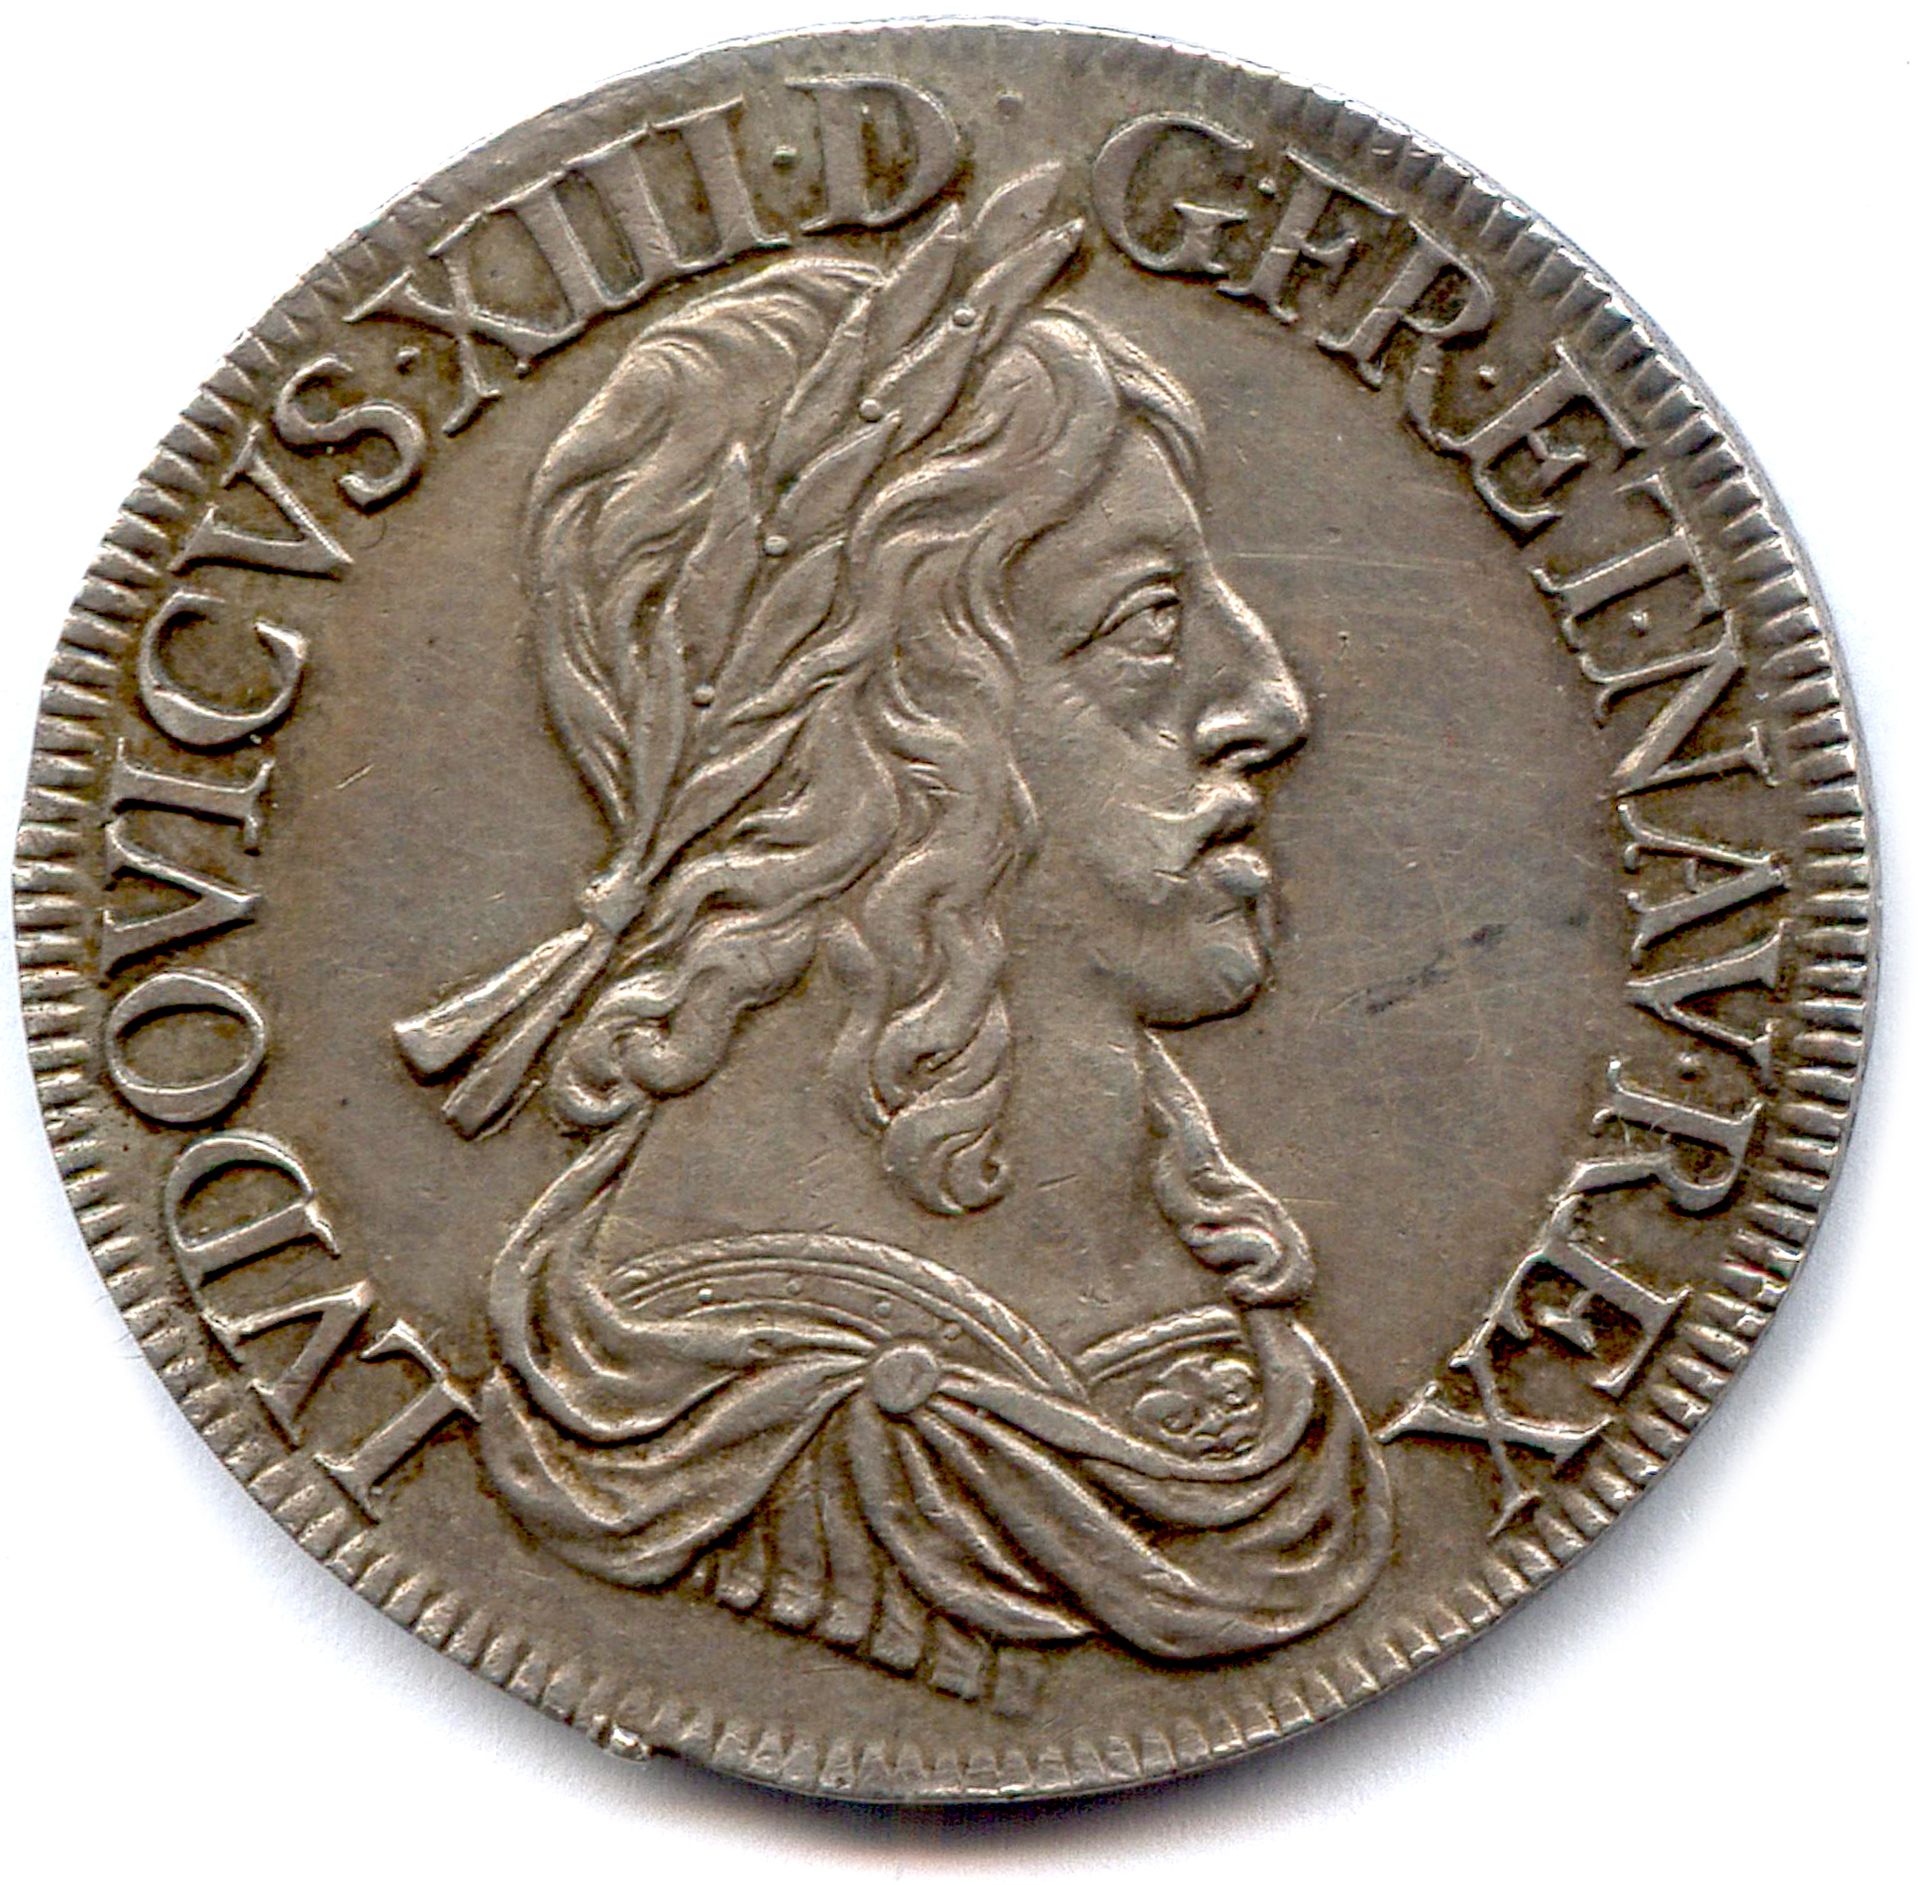 Null LOUIS XIII 14 May 1610 - 14 May 1643

Shield (2nd mark of Jean Warin) 1643 &hellip;